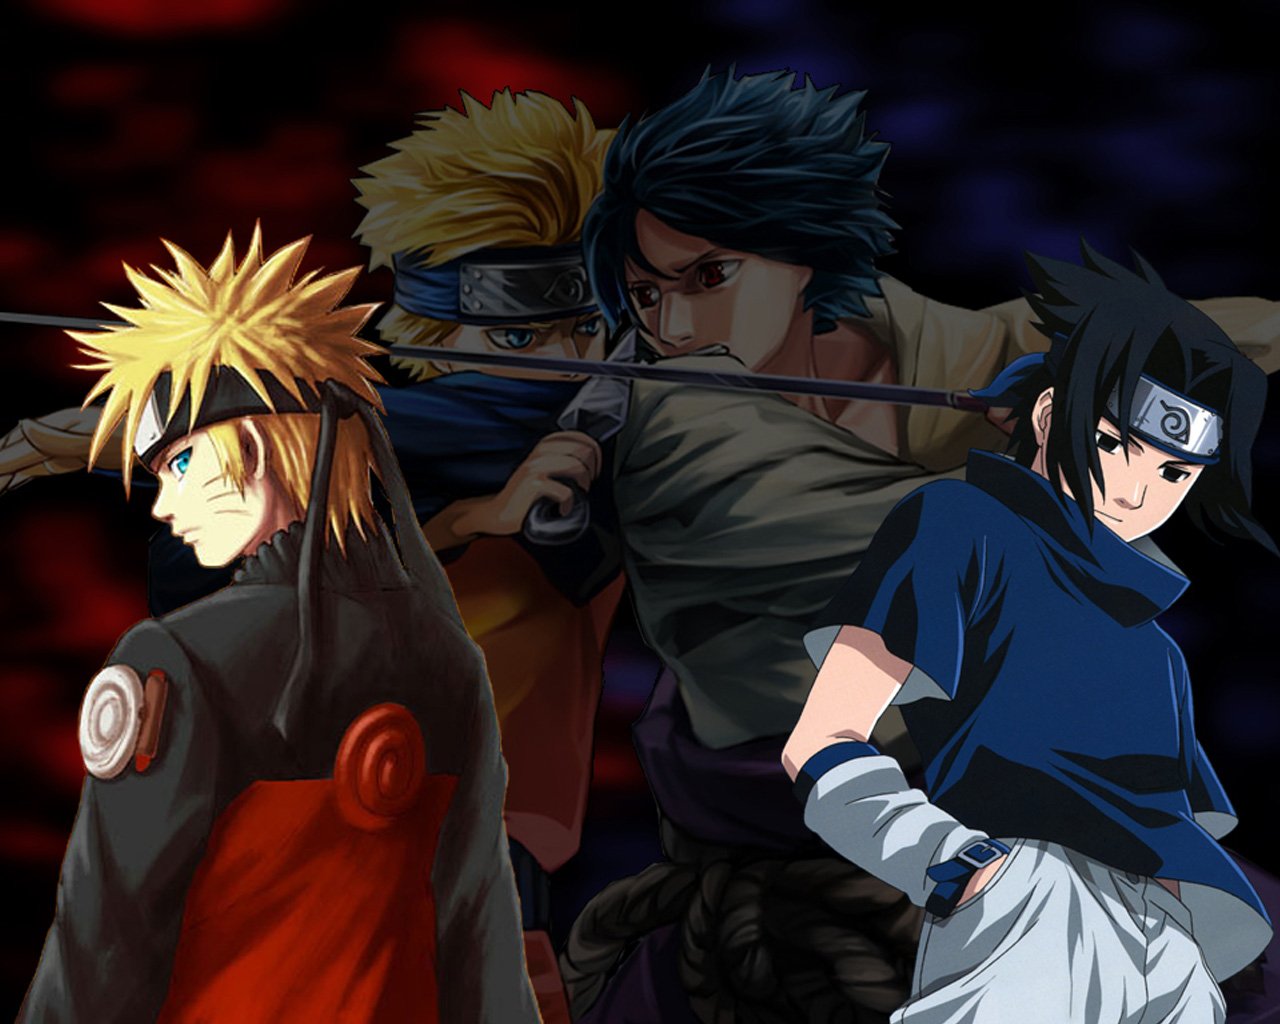 Free Download Anime Wallpapers Hd Naruto Wallpapers Hd 1280x1024